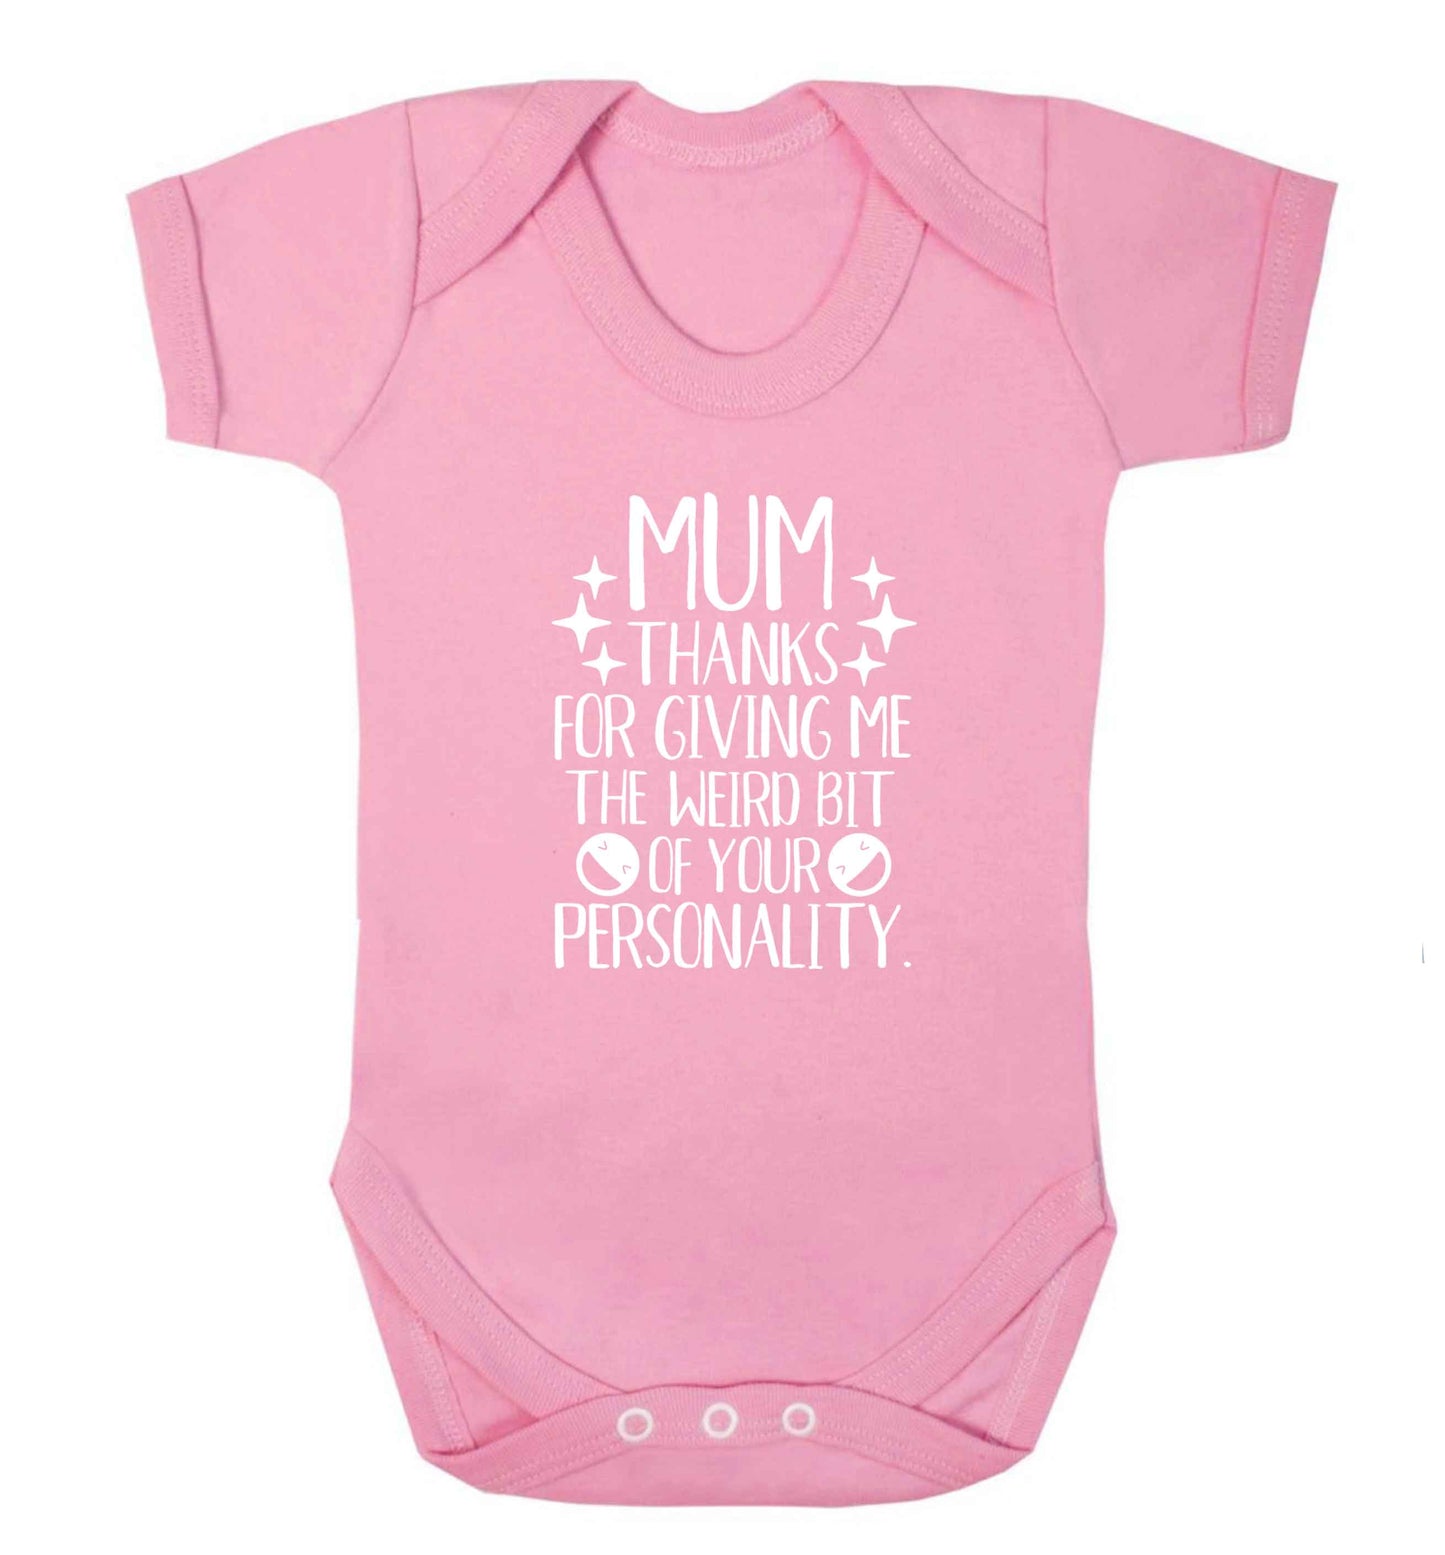 Mum, I love you more than halloumi and if you know me at all you know how deep that is baby vest pale pink 18-24 months